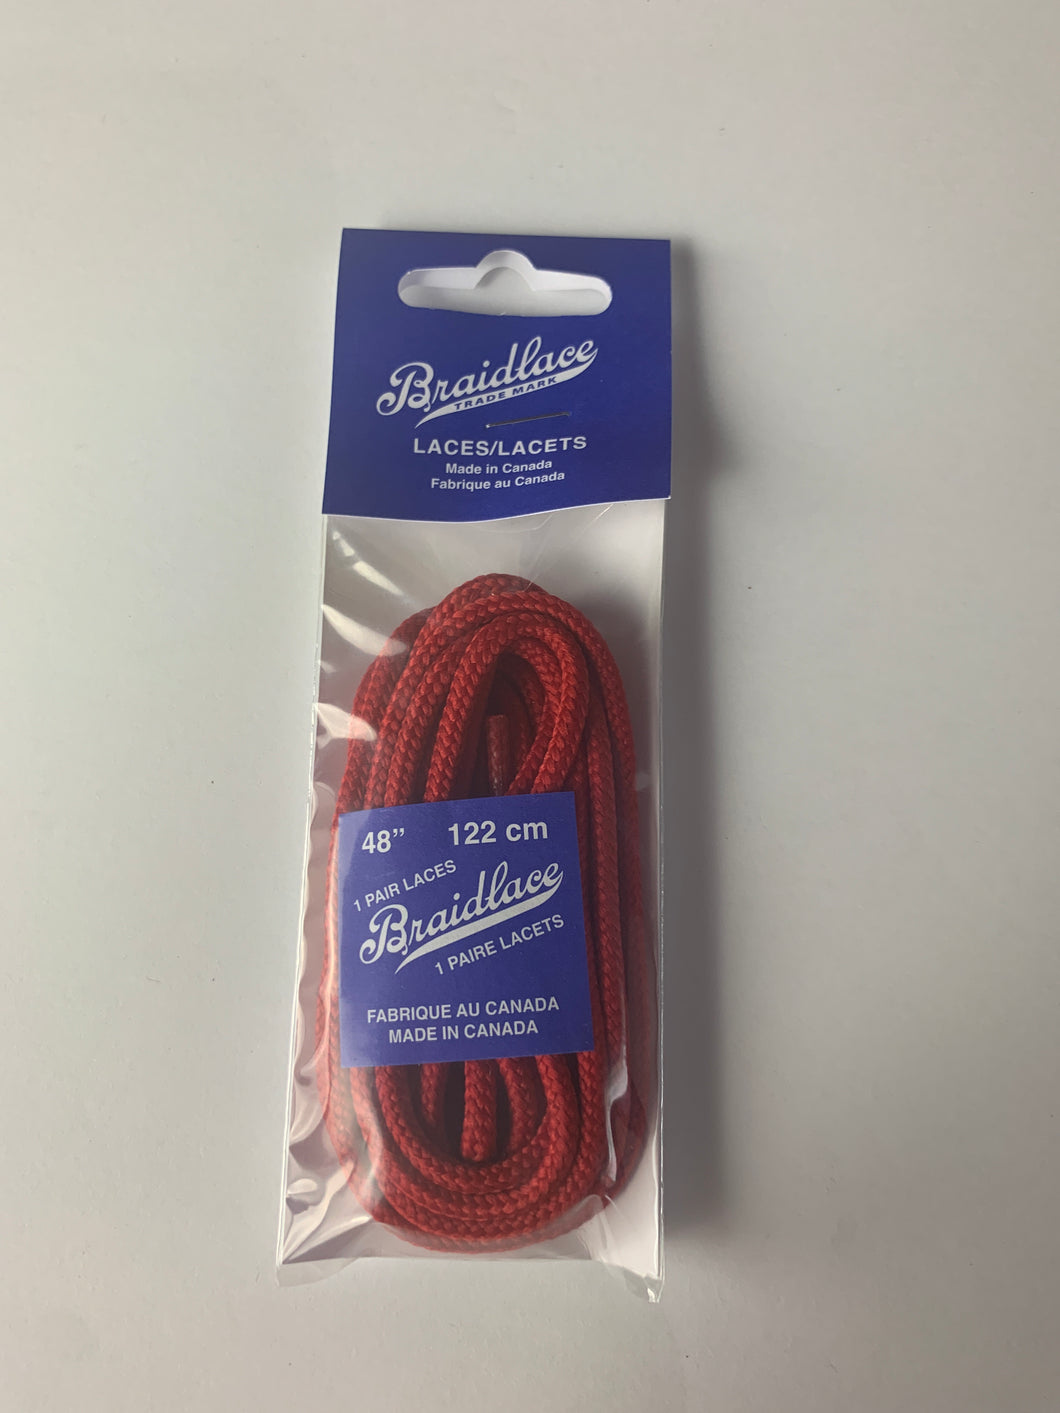 Red Laces - Braidlace - 48